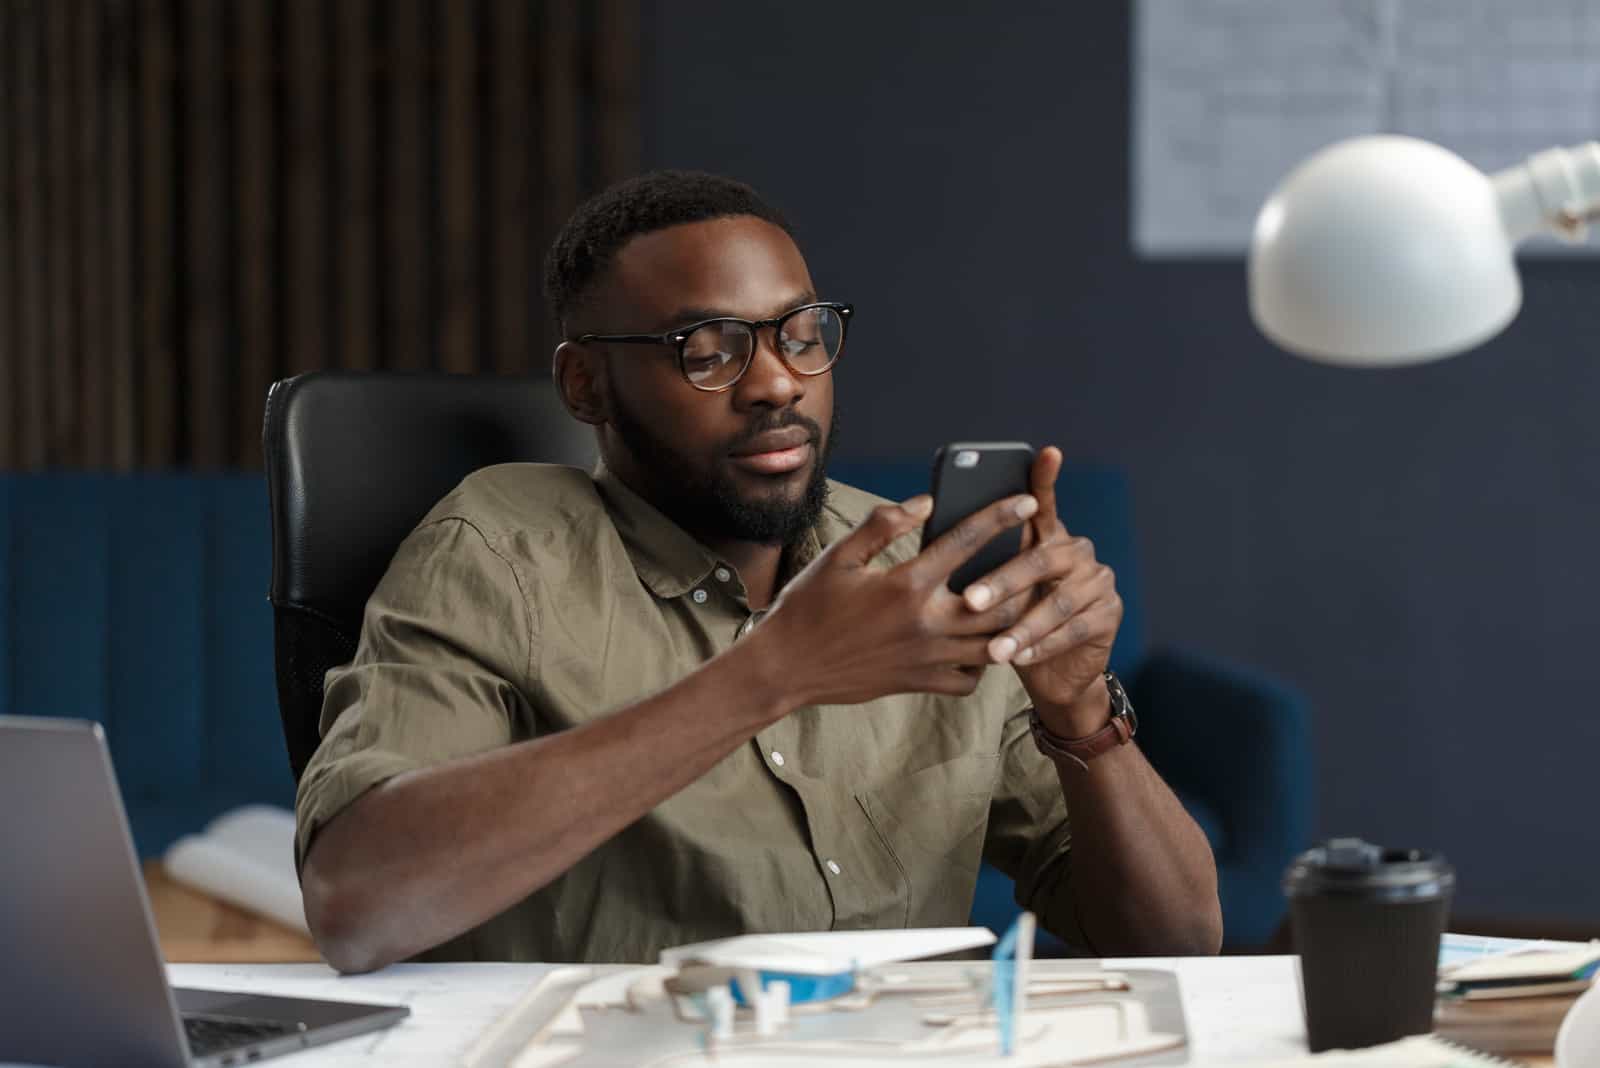 man reading how to apologize to your girlfriend over text article on his phone